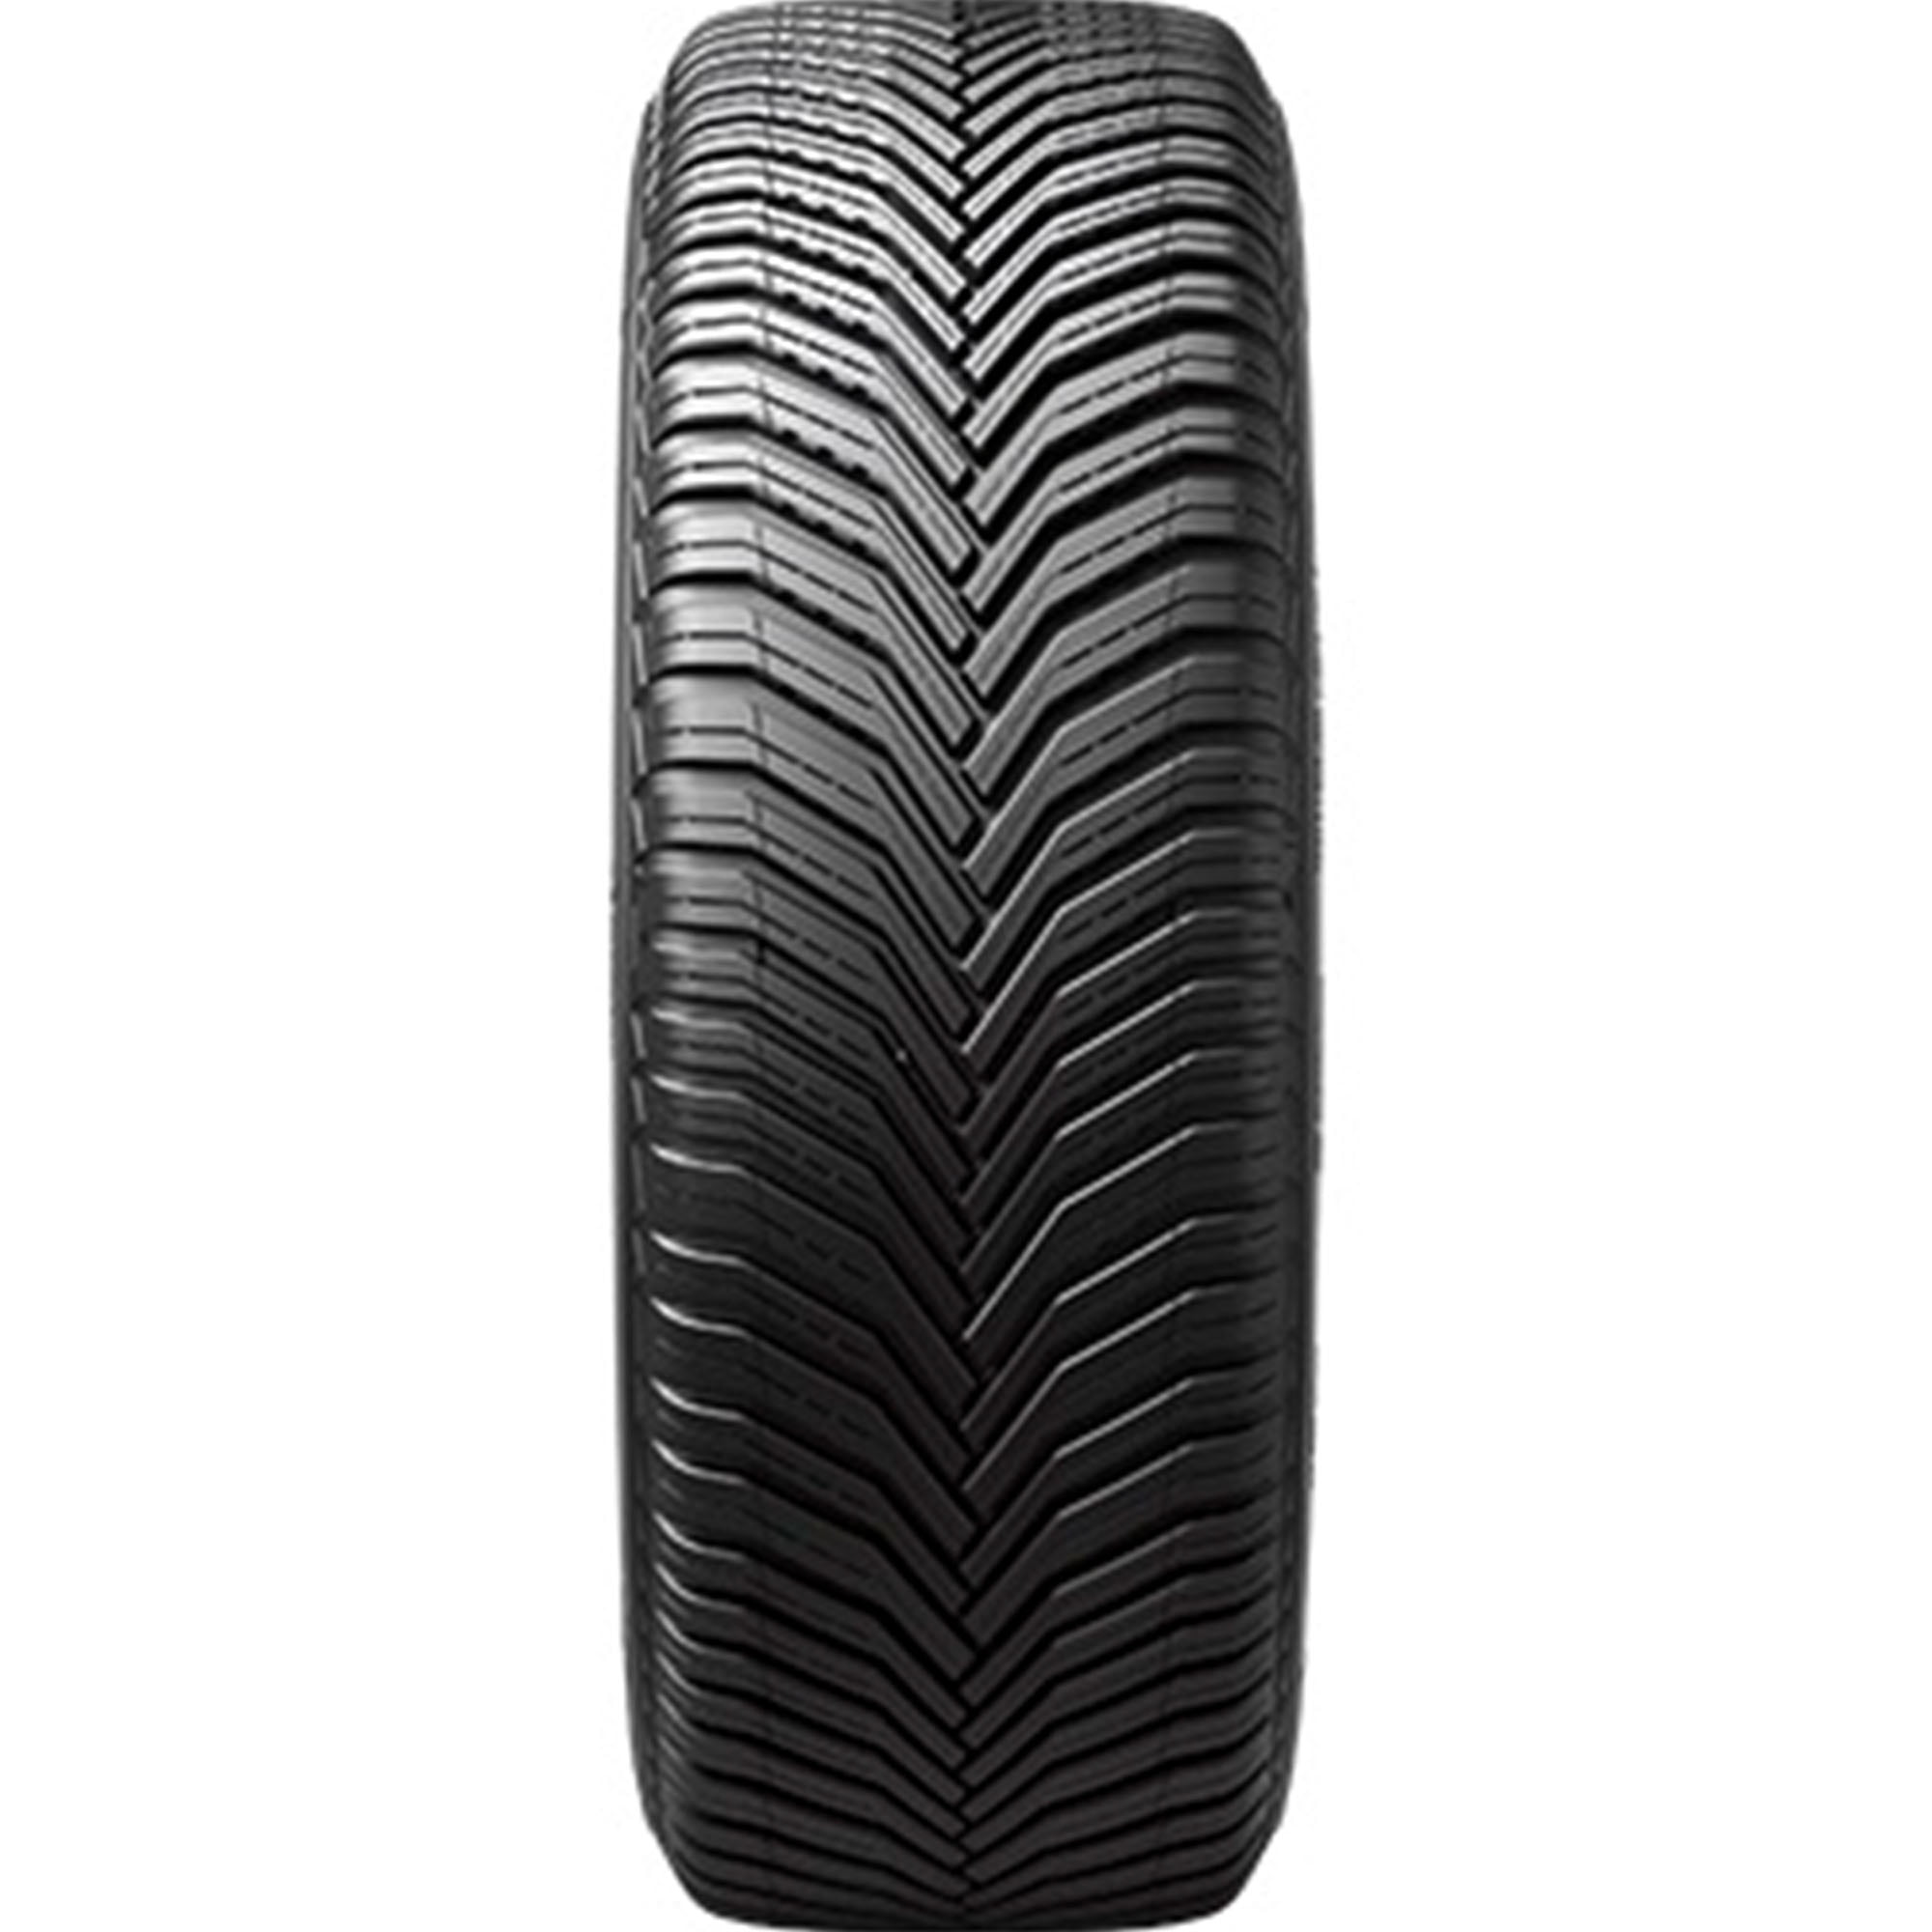 Michelin Cross Climate2 A/W All Weather 235/55R19 105V XL SUV/Crossover  Tire